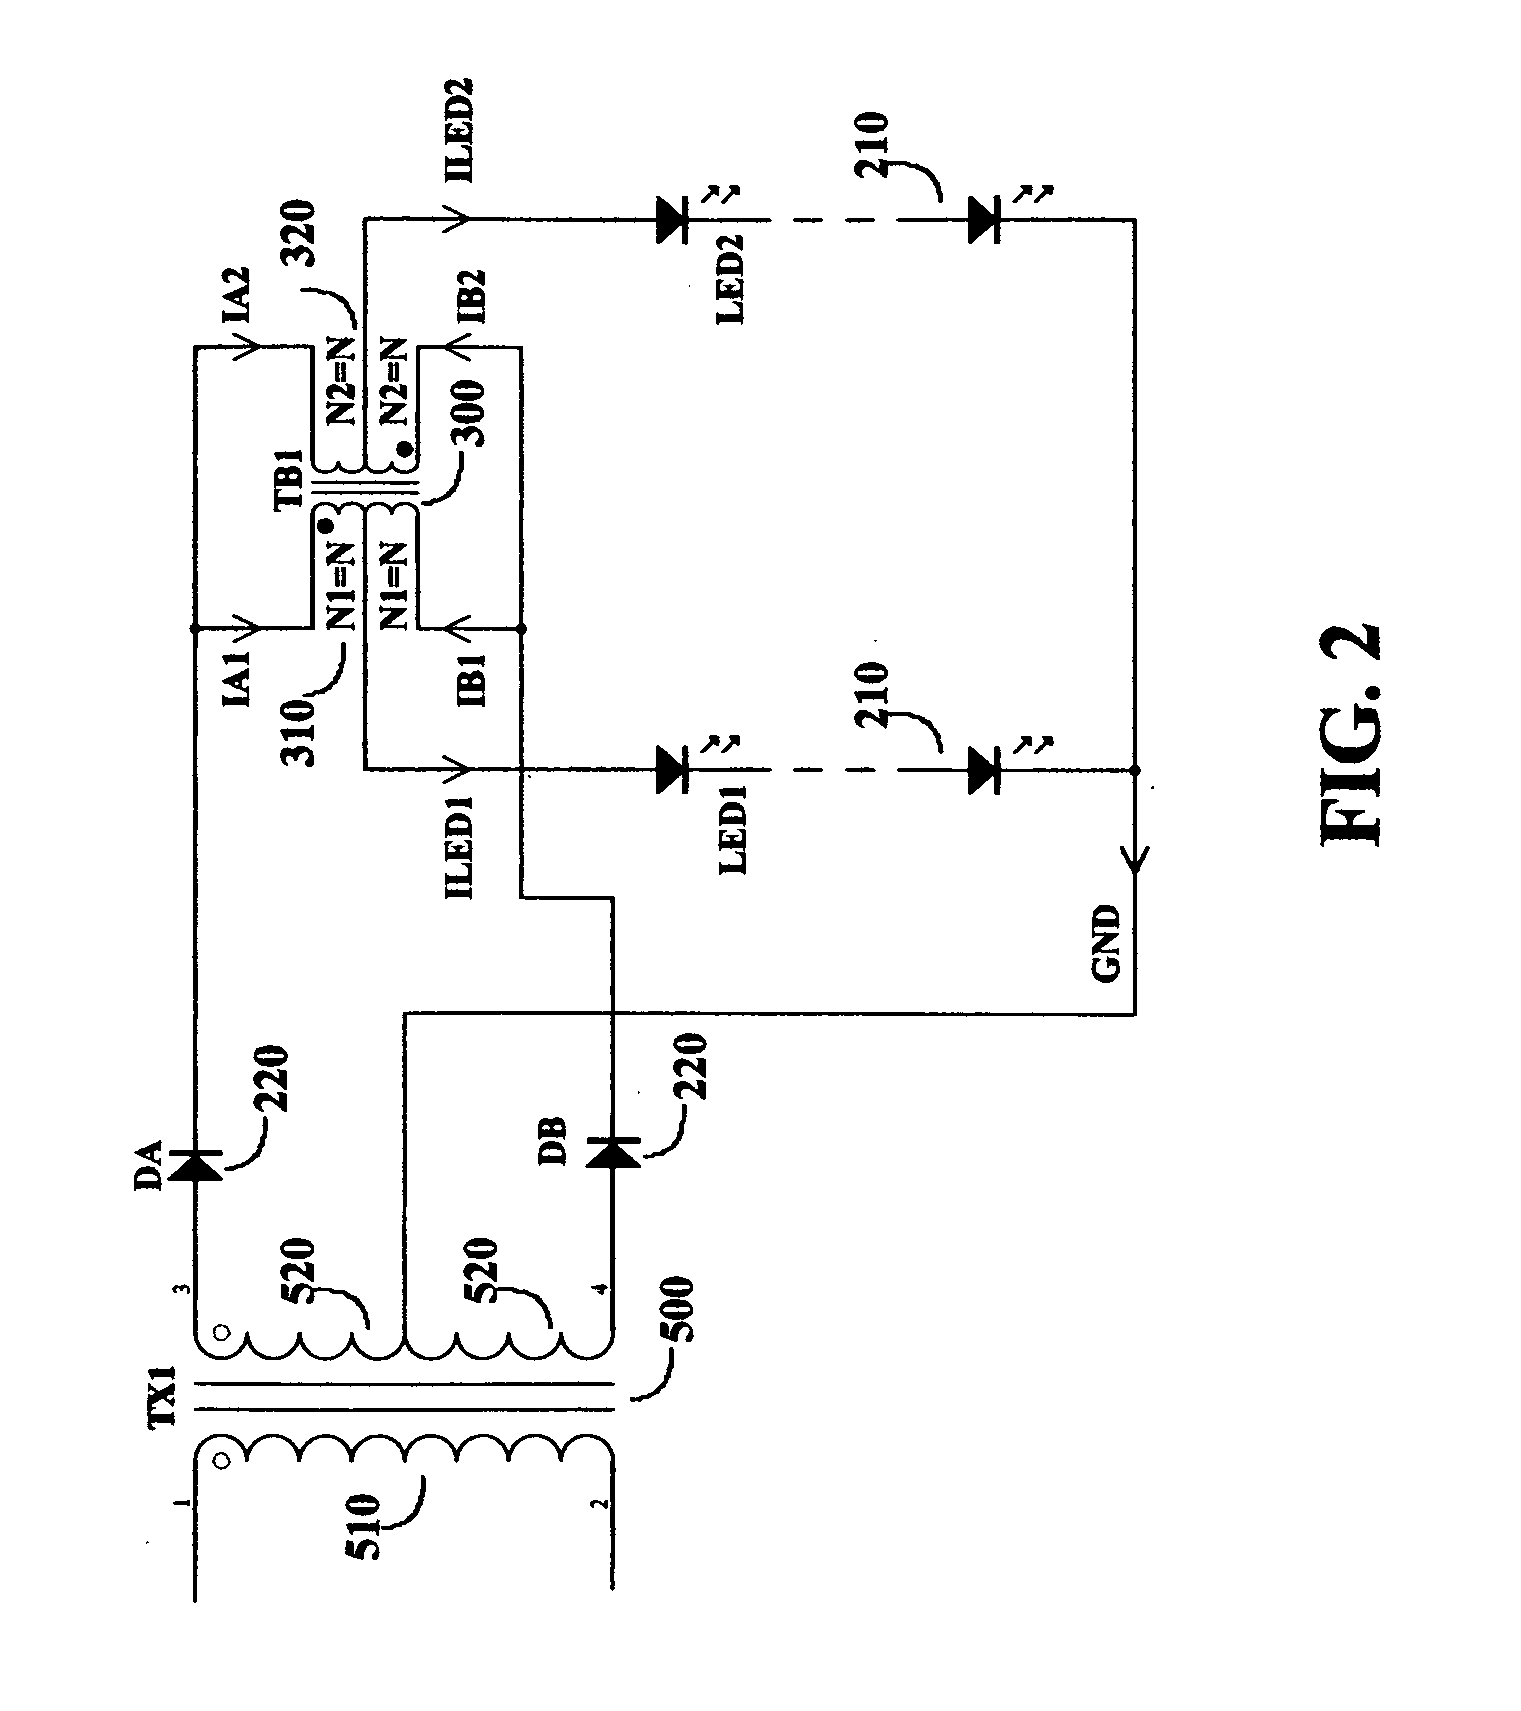 High efficiency drive method for driving LED devices